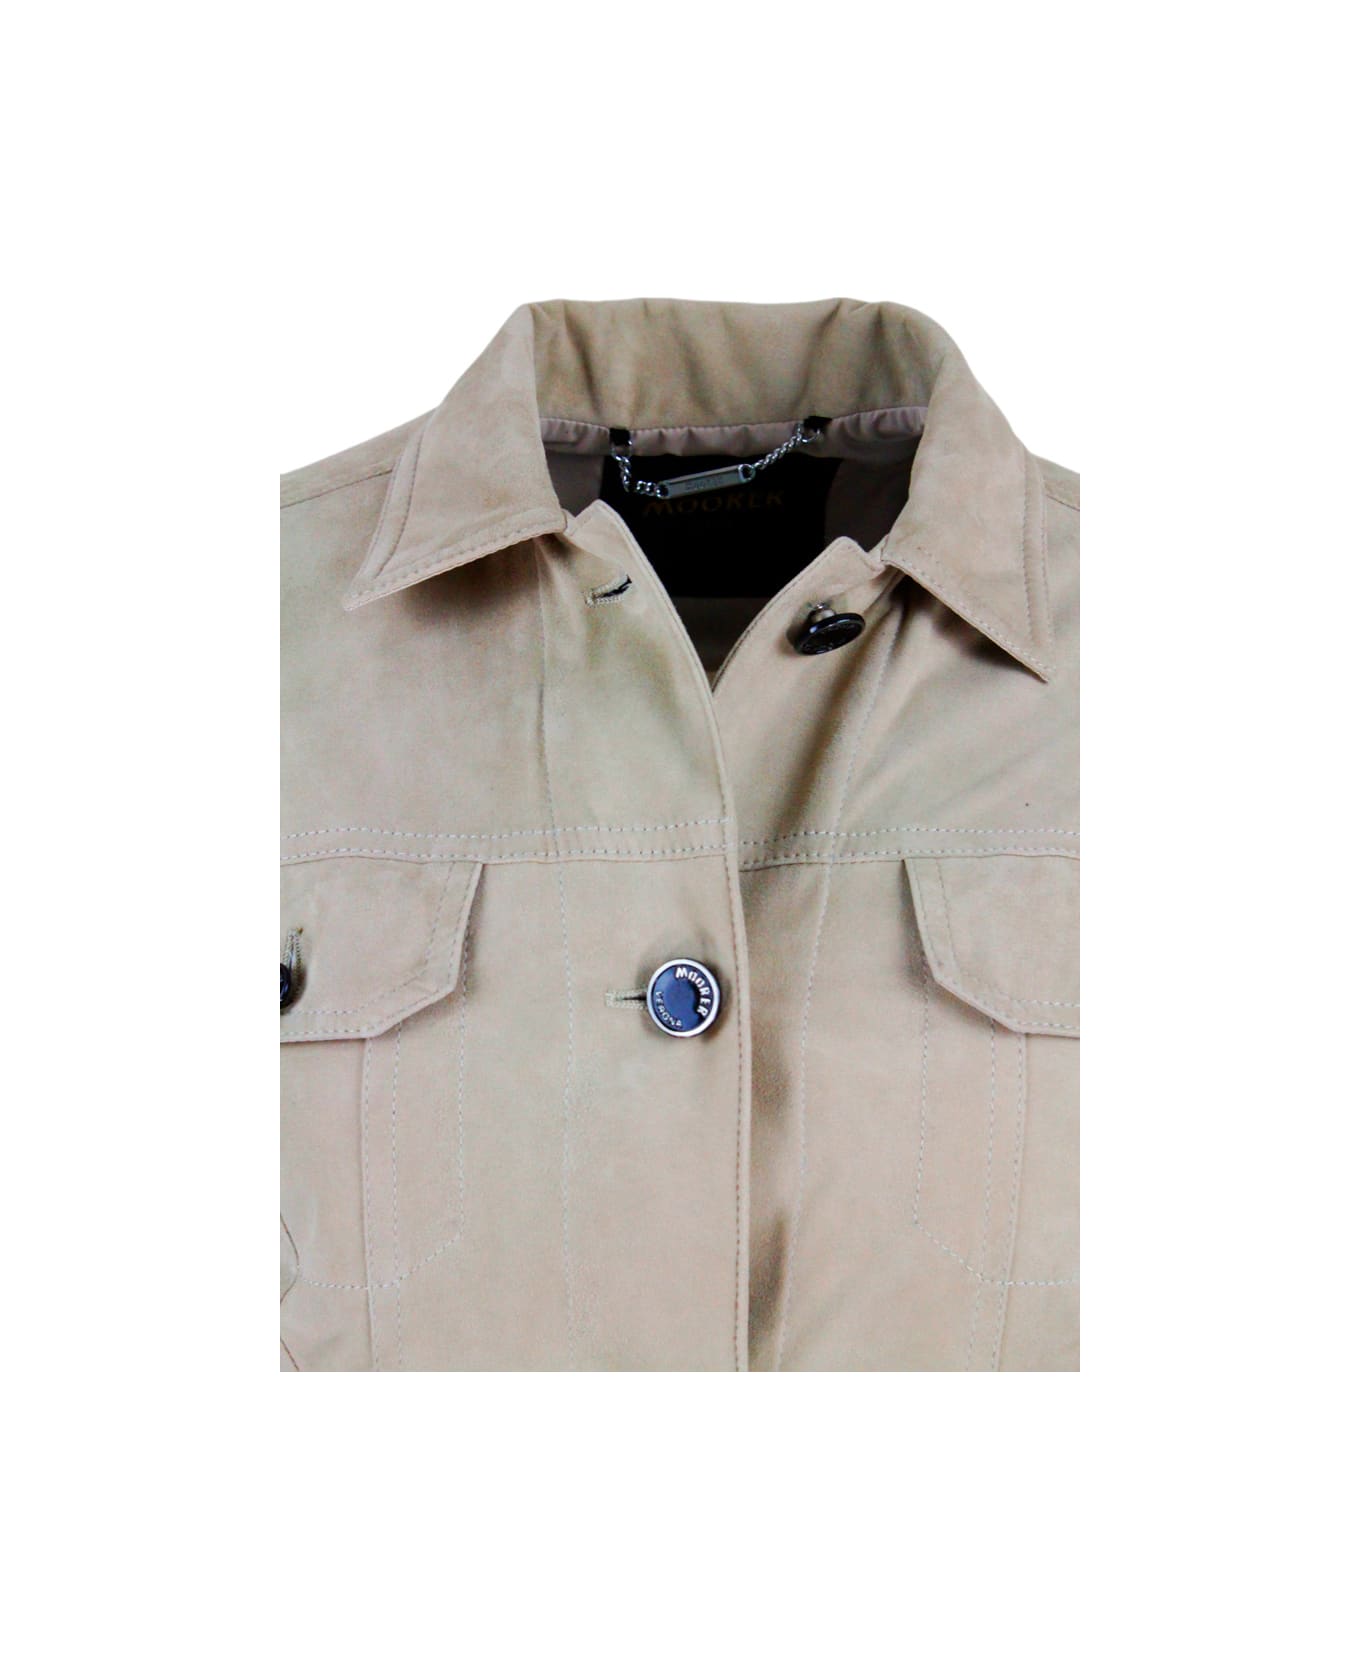 Moorer Windproof Lightweight Nylon Jacket With Soft Suede Front With Chest Pockets - Beige